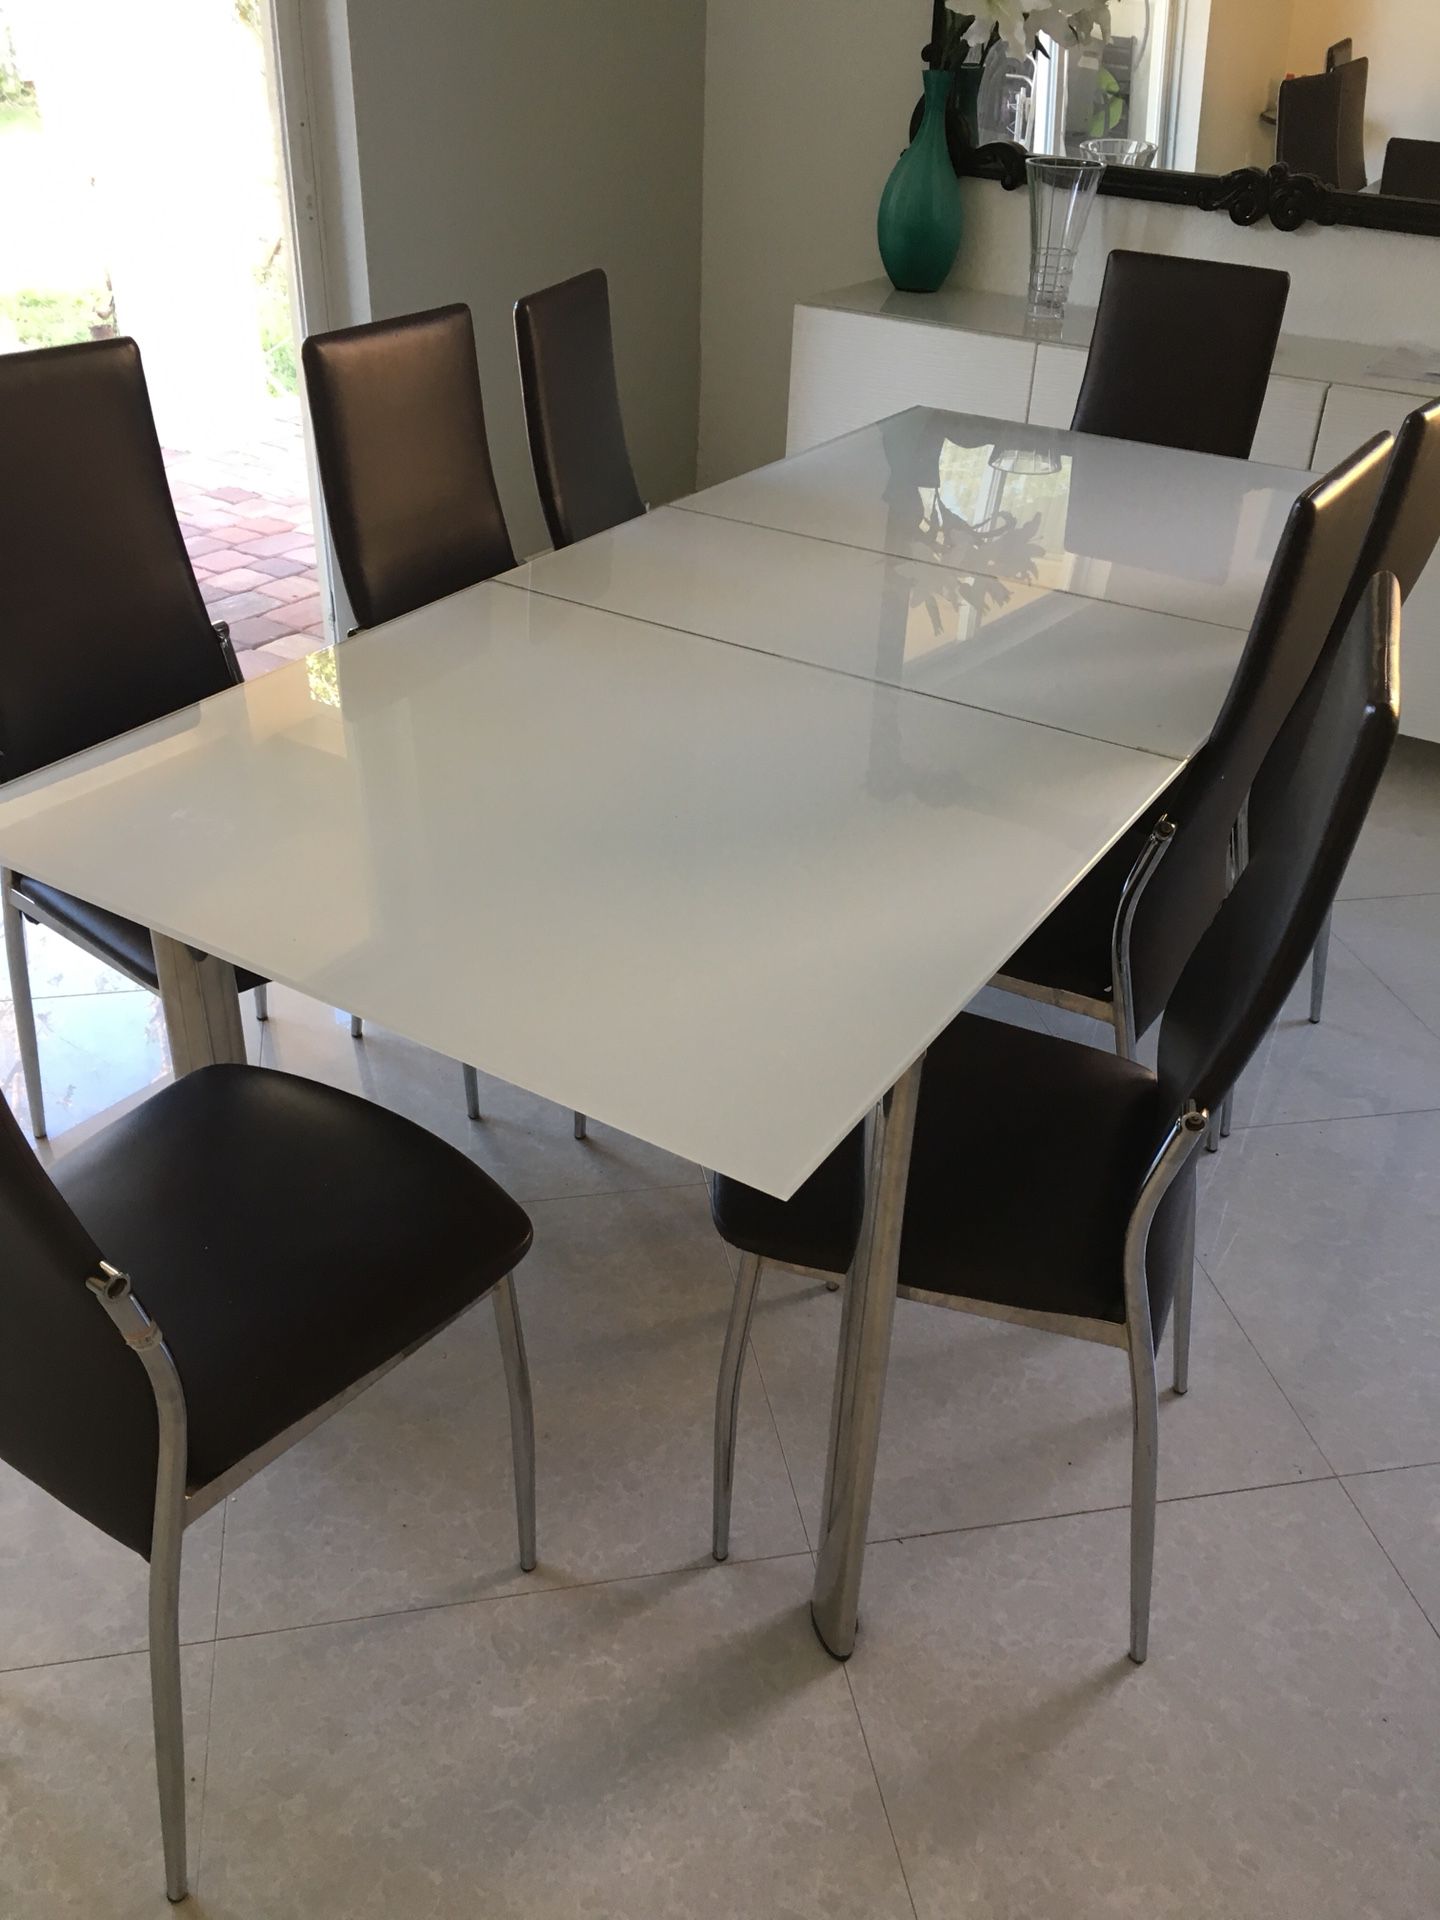 Modern style glass dining table for 8 with 8 chairs, converts to 6 by sliding middle.